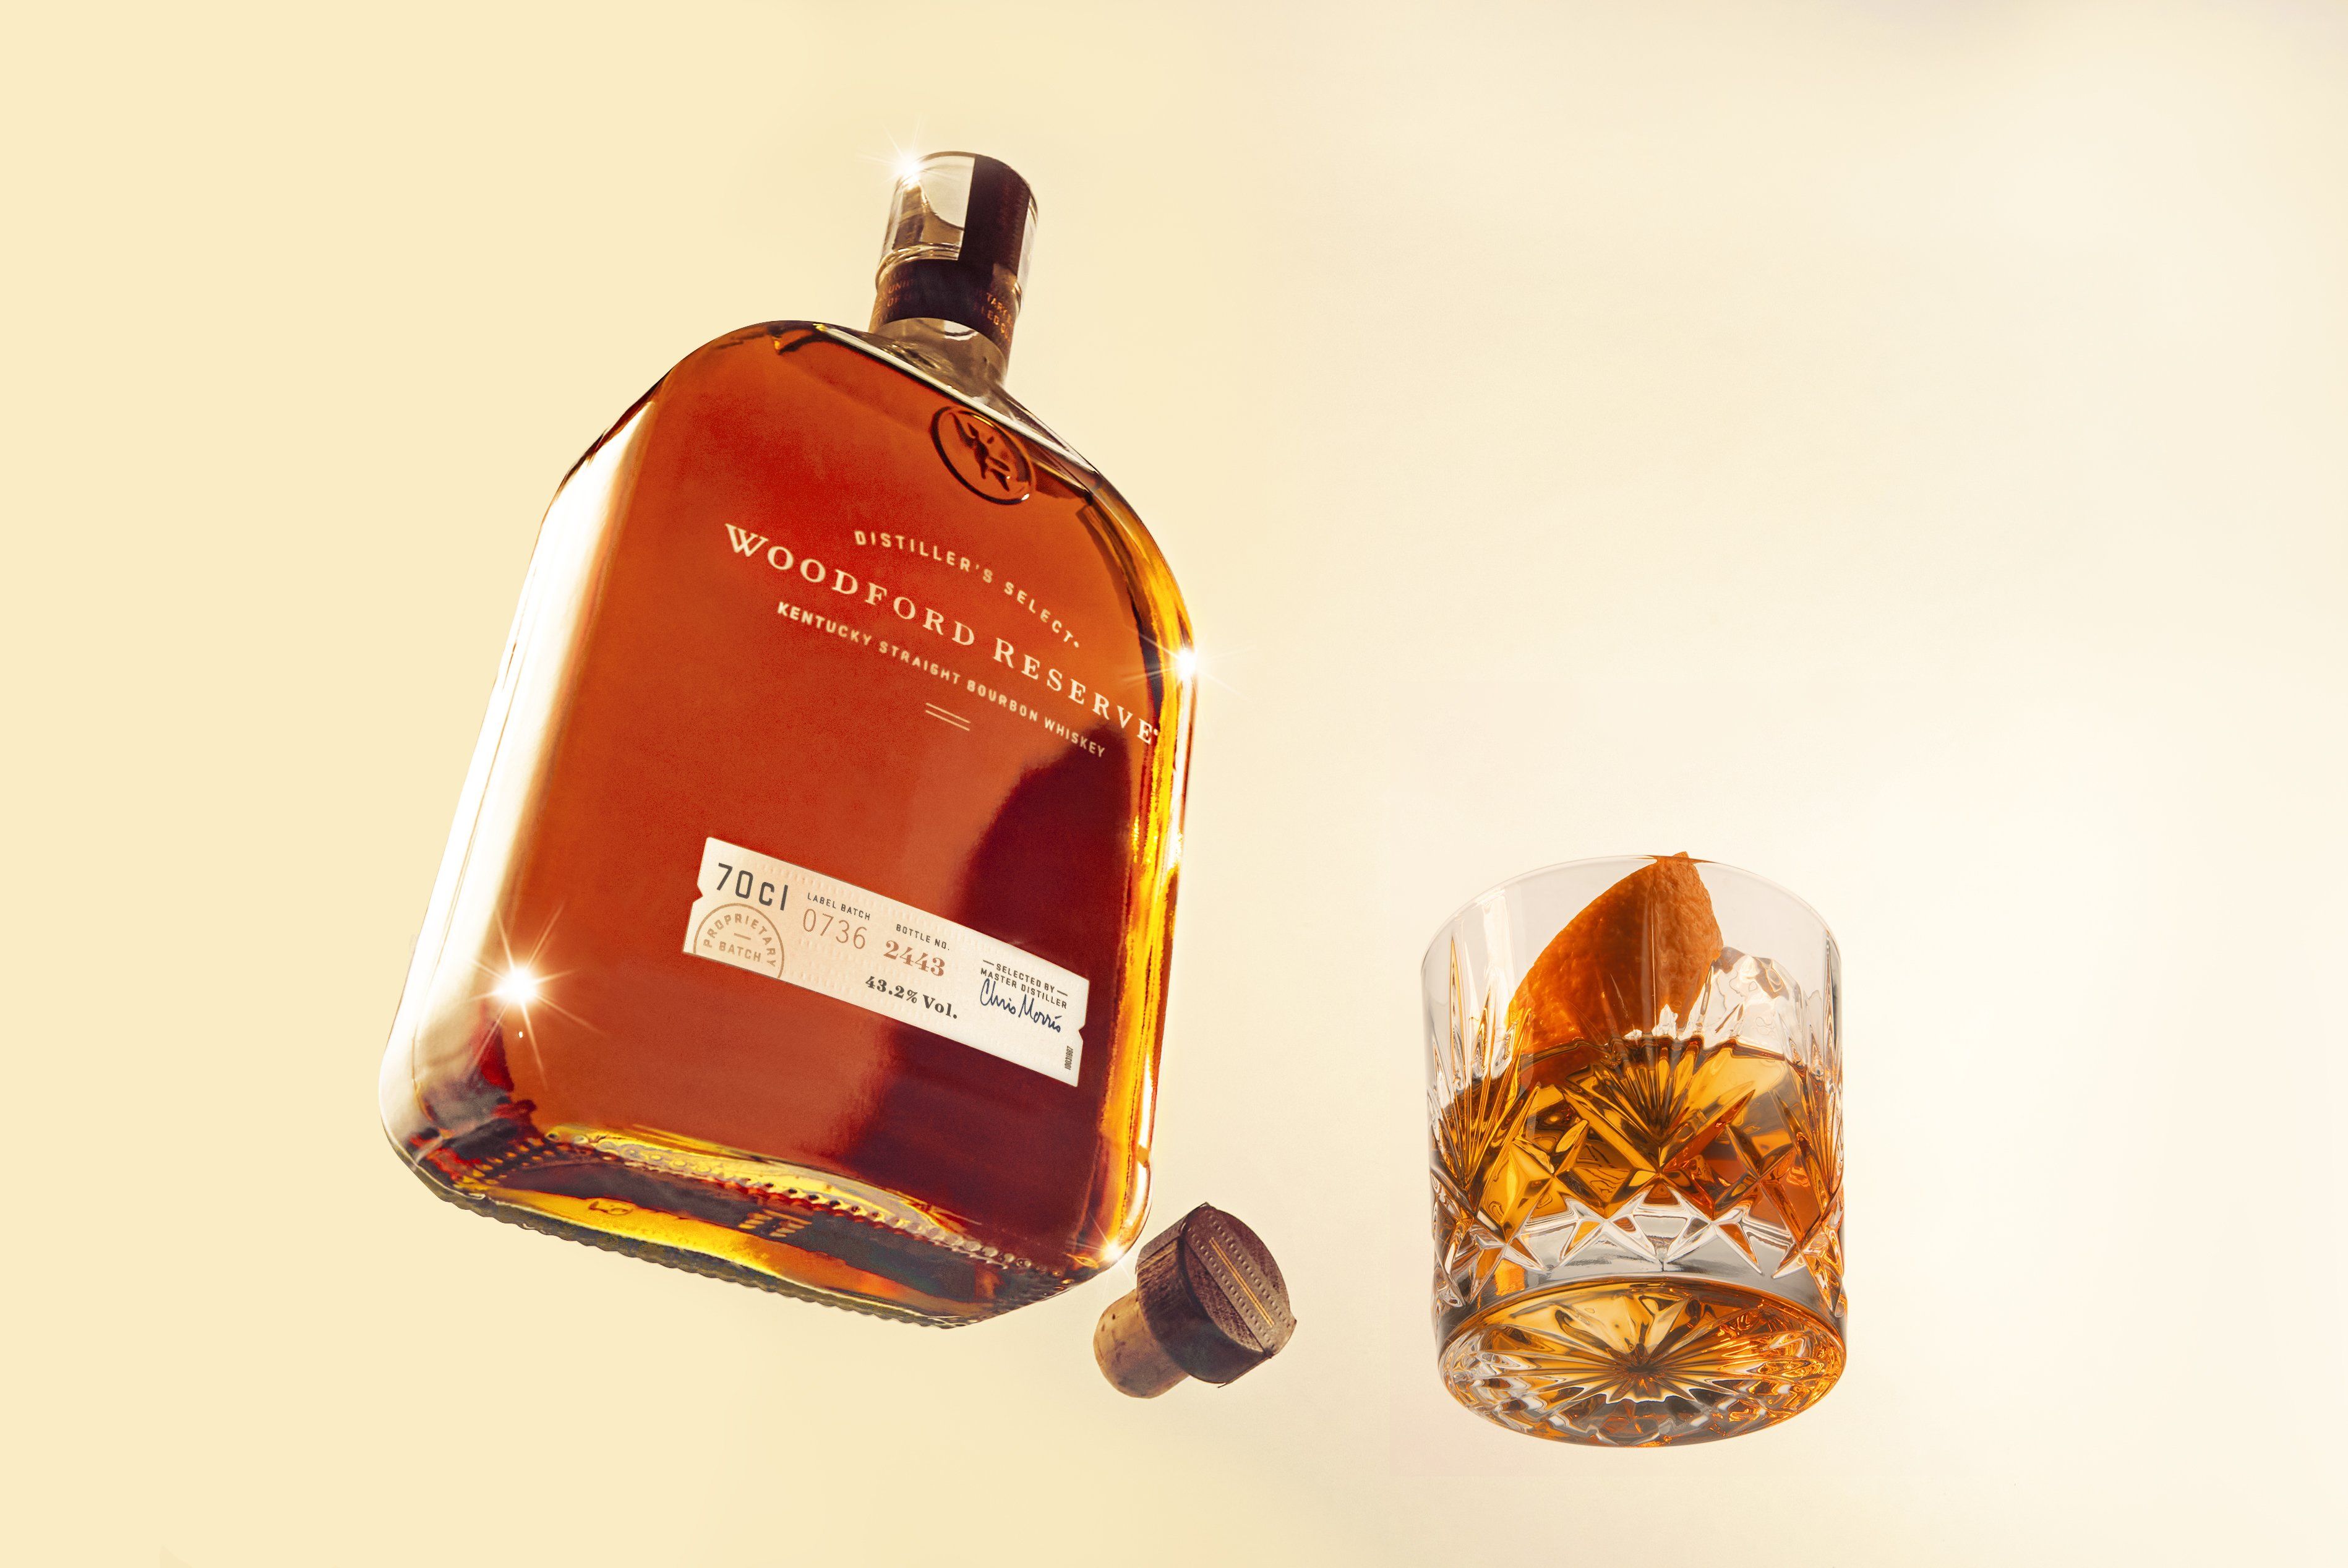 global-wr-bourbon-old-fashioned-70cl-fy24-spectacle-for-the-senses-ofw-floating-photography-002-65535c4b75693.jpg